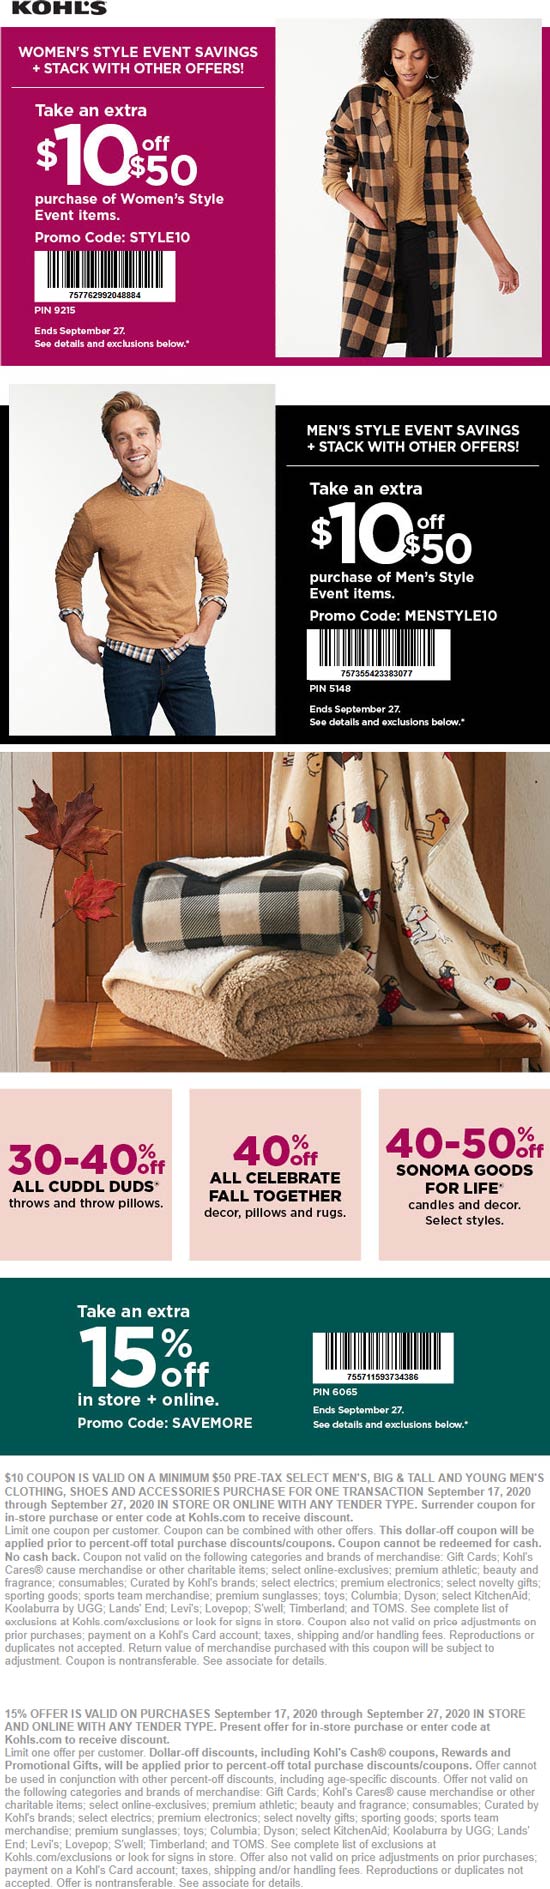 Kohls stores Coupon  Extra 15% + stack another $10 off $50 at Kohls, or online via promo code SAVEMORE #kohls 